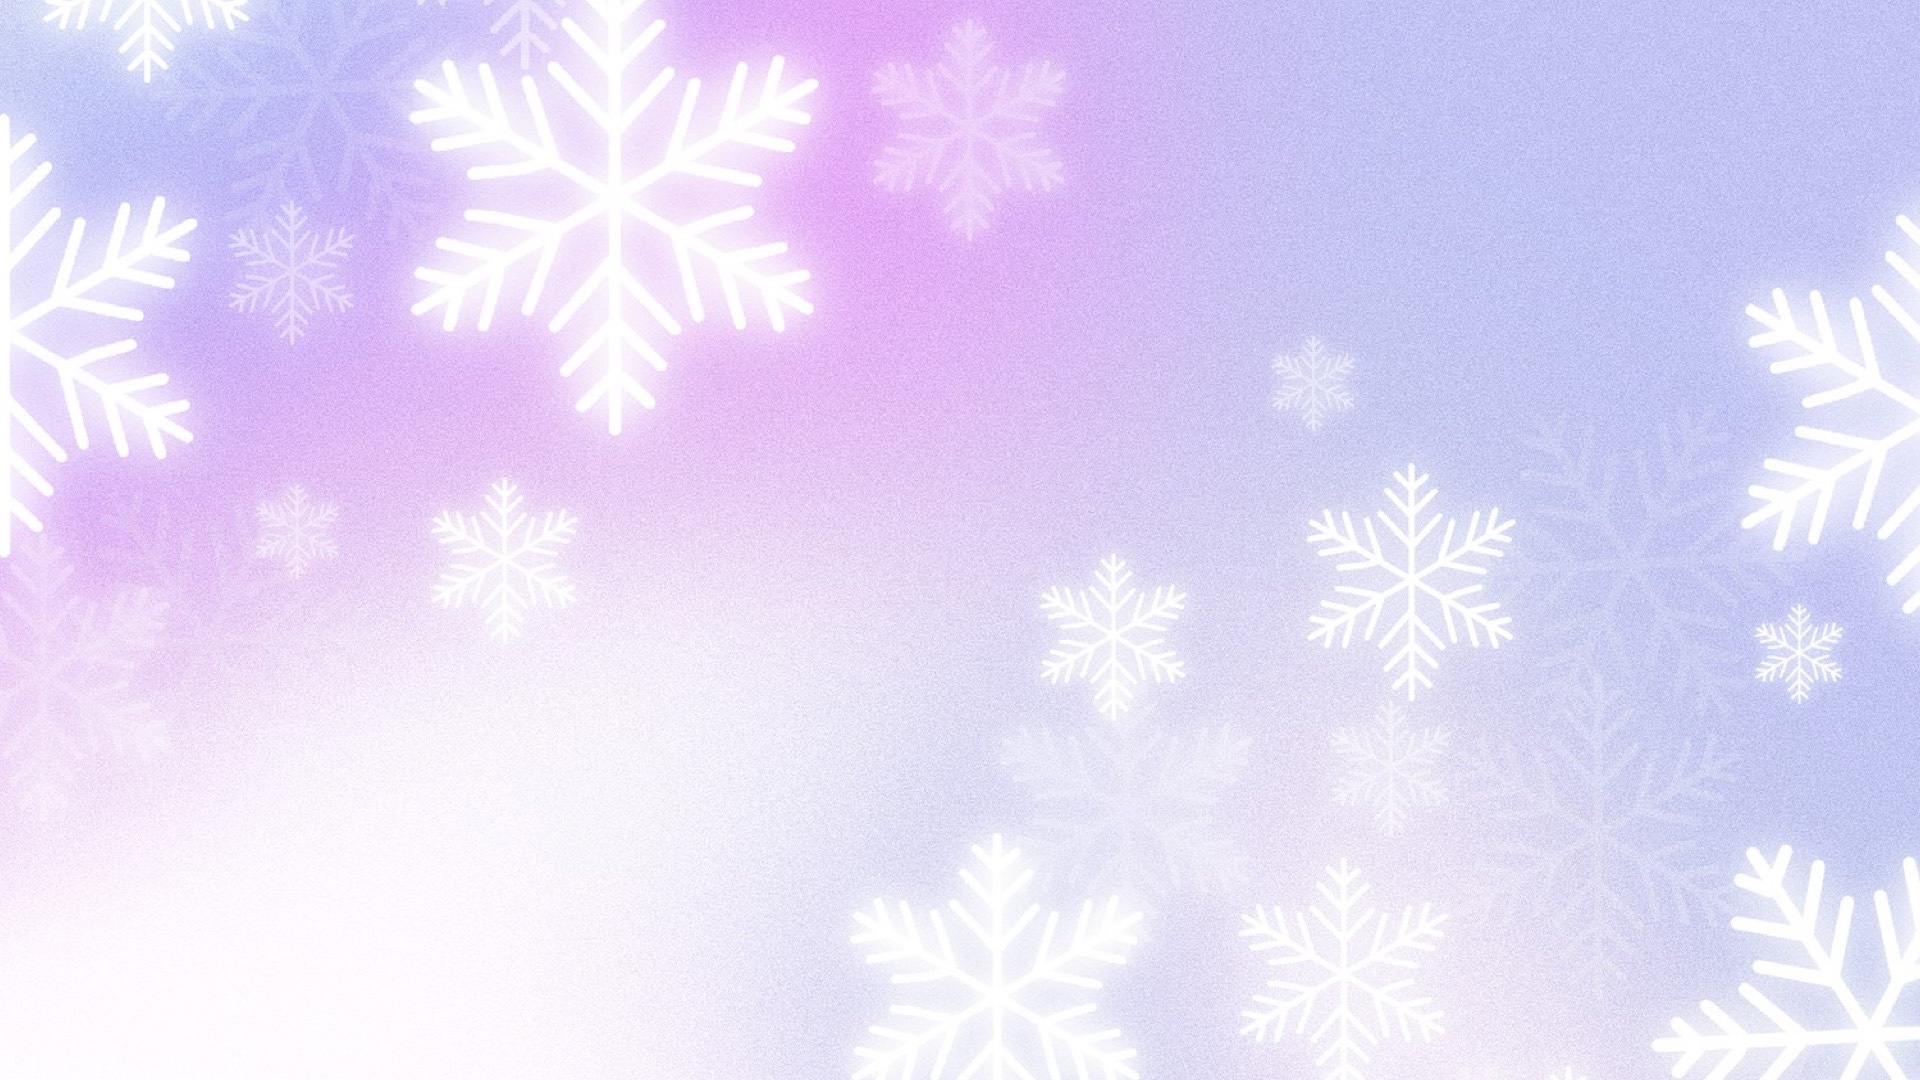 A Blurry Photo Of Snow Flakes On A Blue And Pink Background Zoom Backgrounds Template